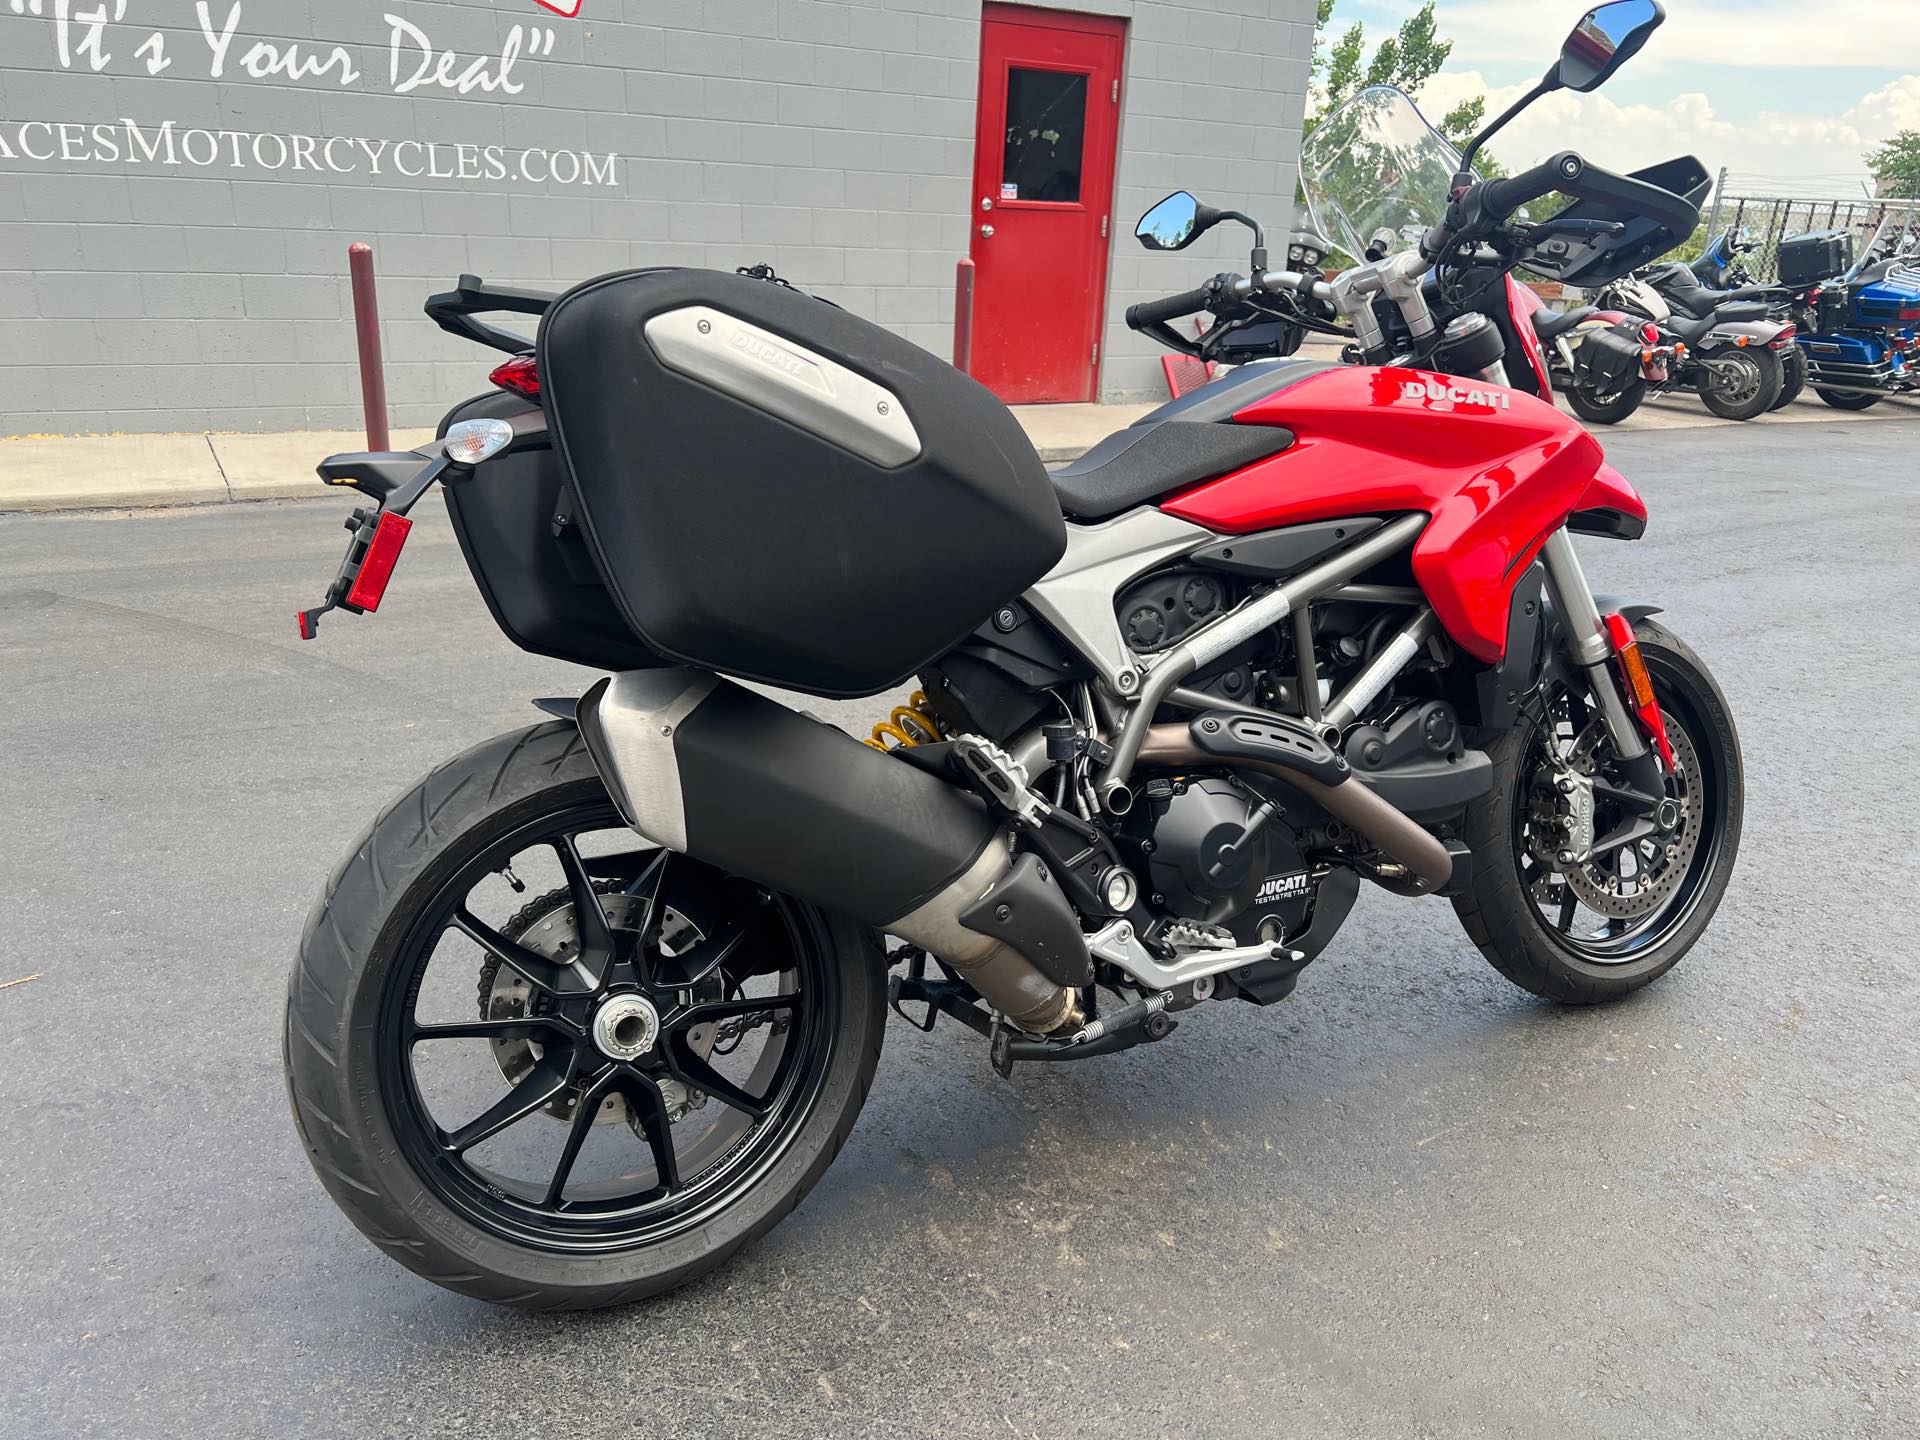 2016 Ducati Hyperstrada 939 at Aces Motorcycles - Fort Collins